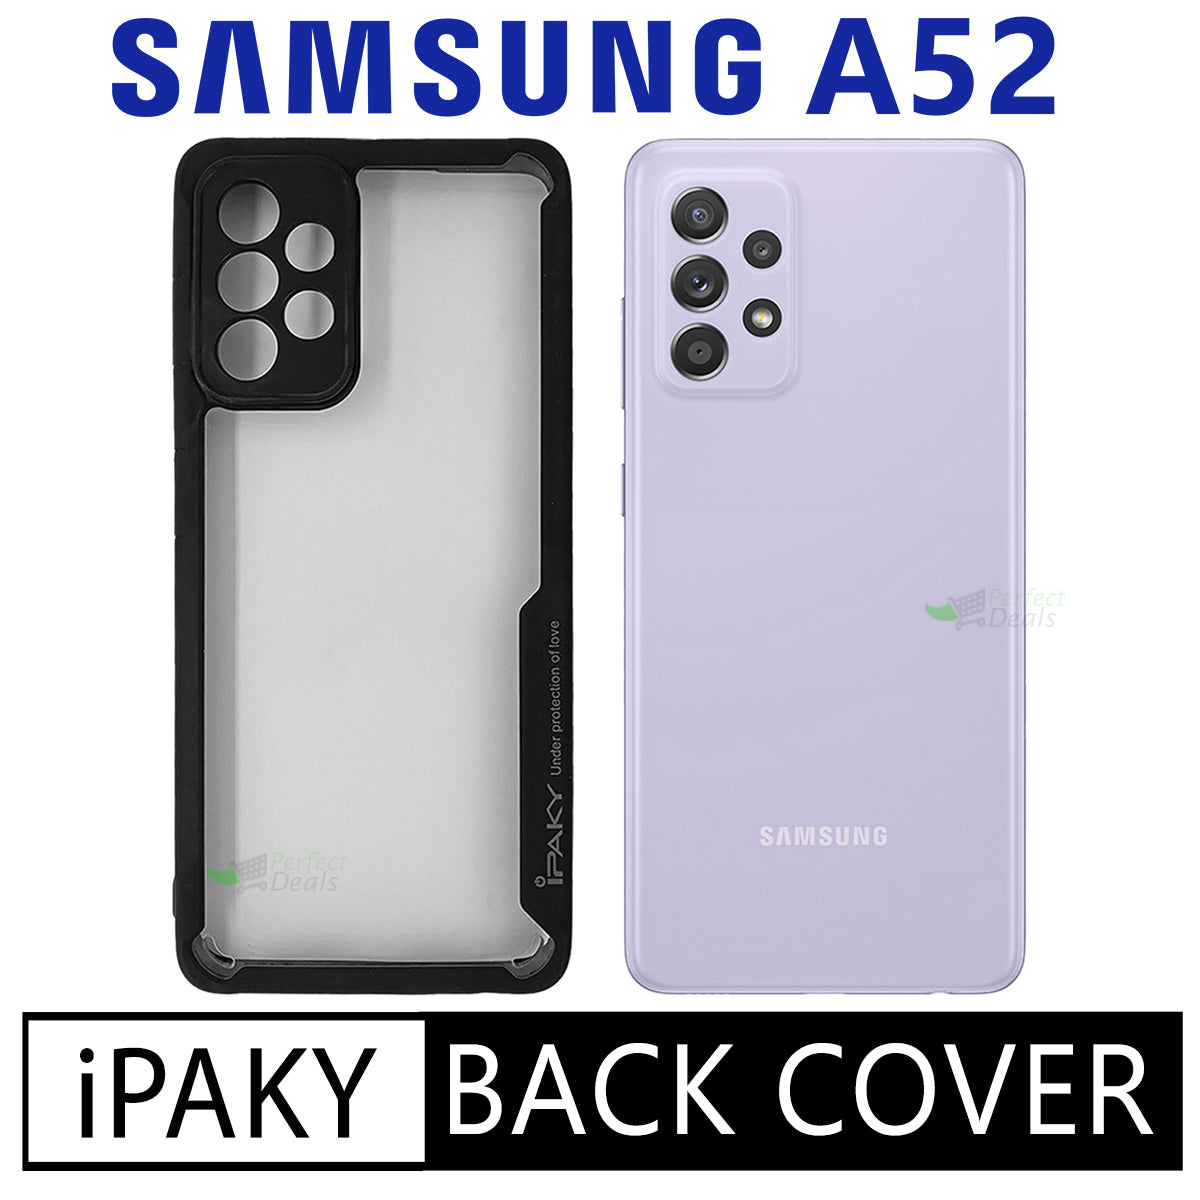 iPaky Shock Proof Back Cover for Samsung A52 4G